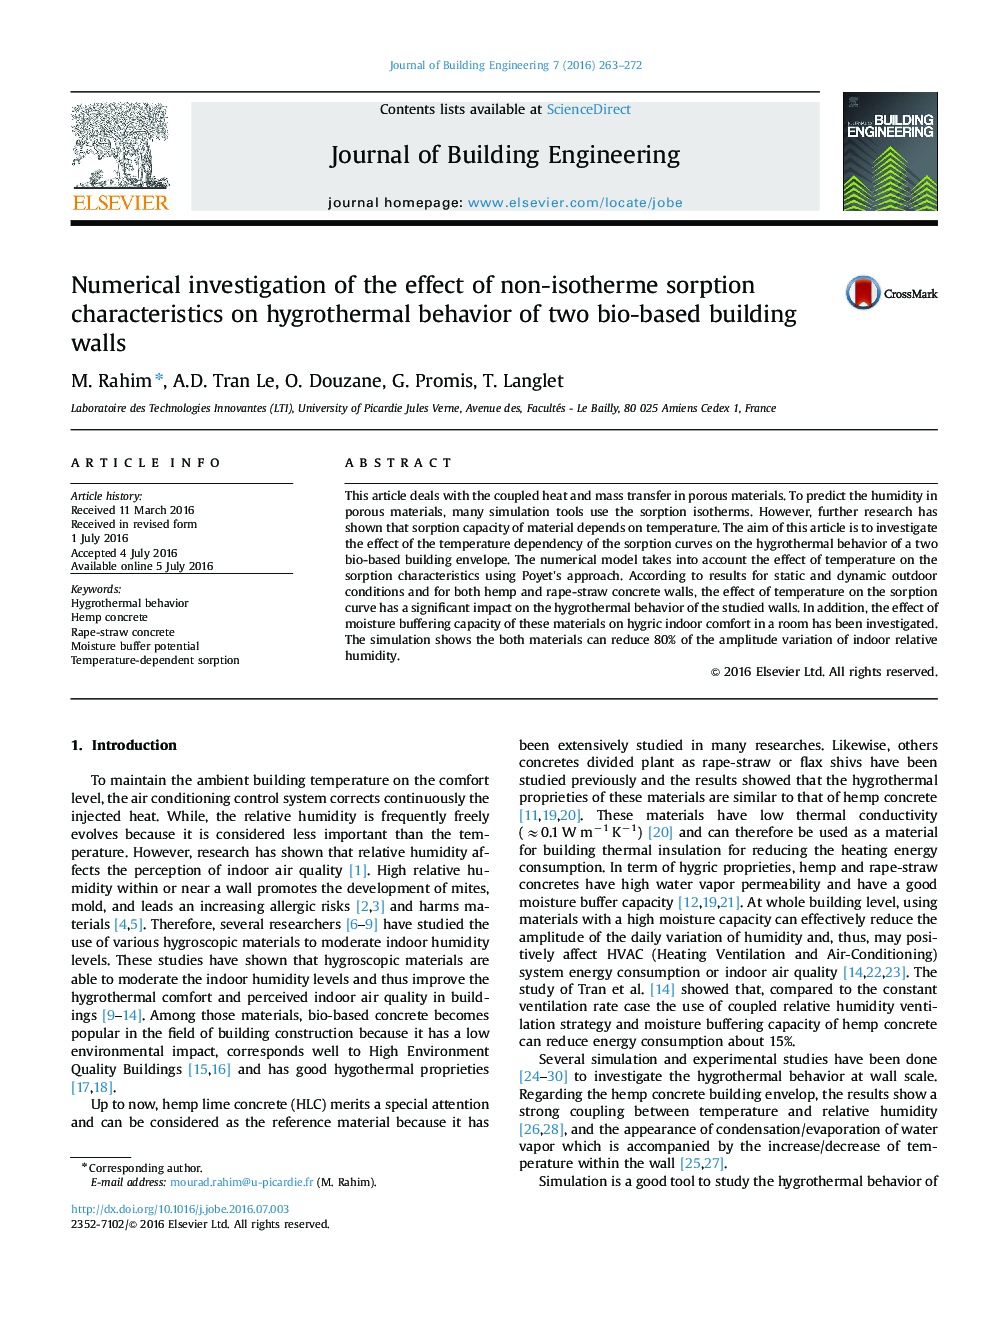 Numerical investigation of the effect of non-isotherme sorption characteristics on hygrothermal behavior of two bio-based building walls